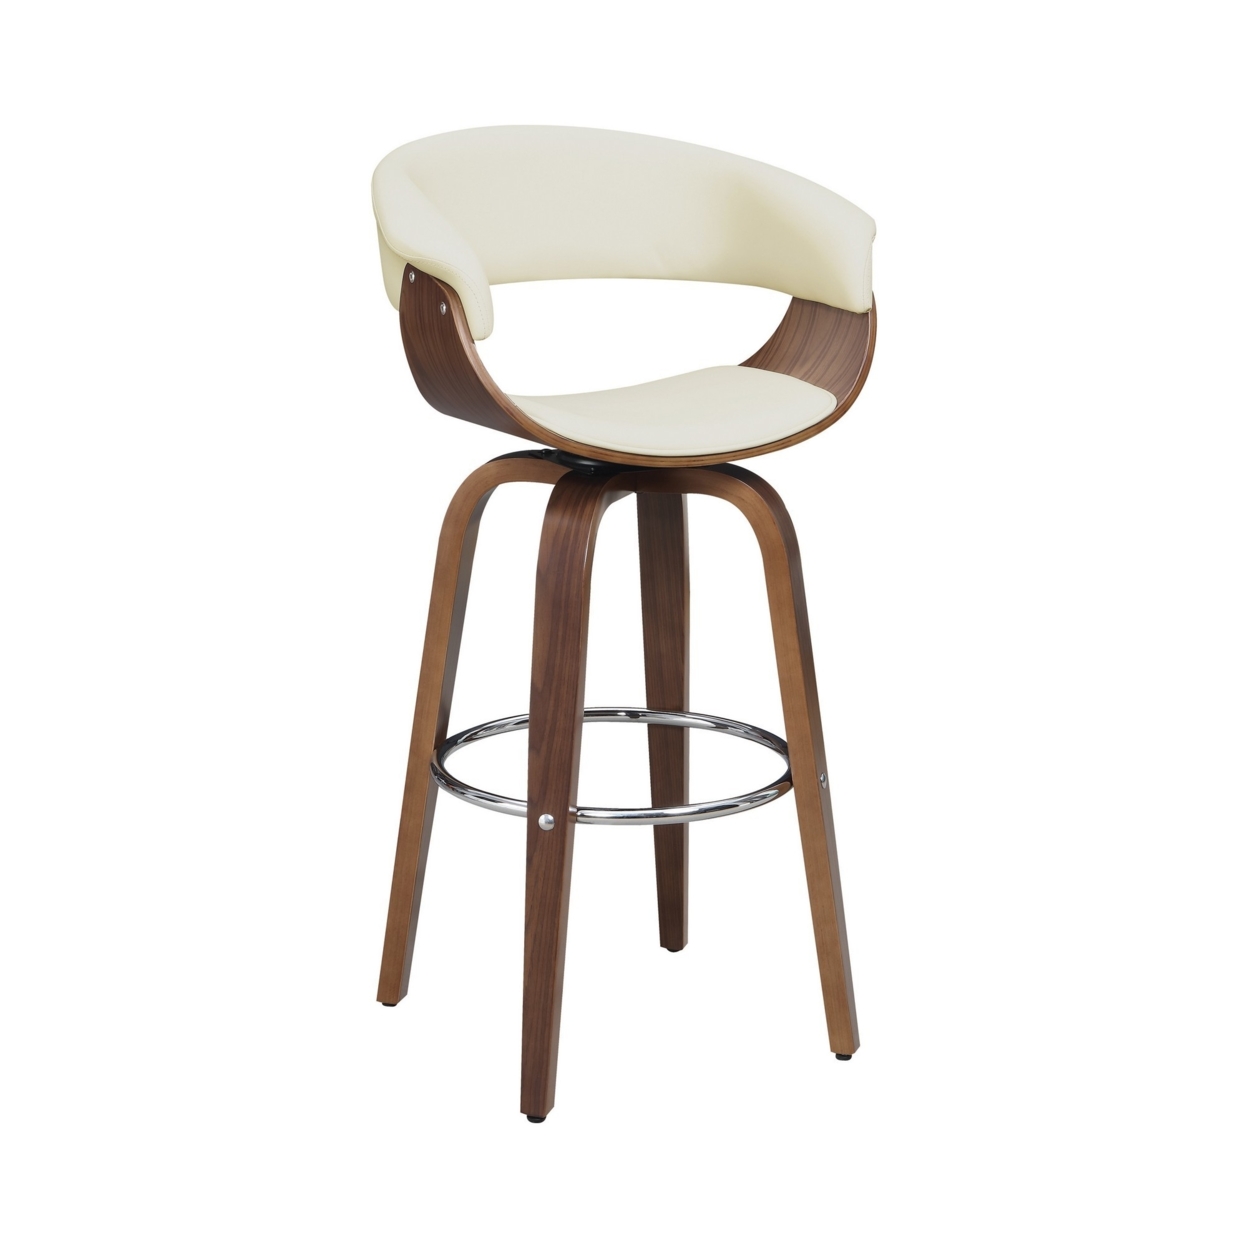 Barstool With Counter Open Design And Wooden Legs, Cream And Brown- Saltoro Sherpi